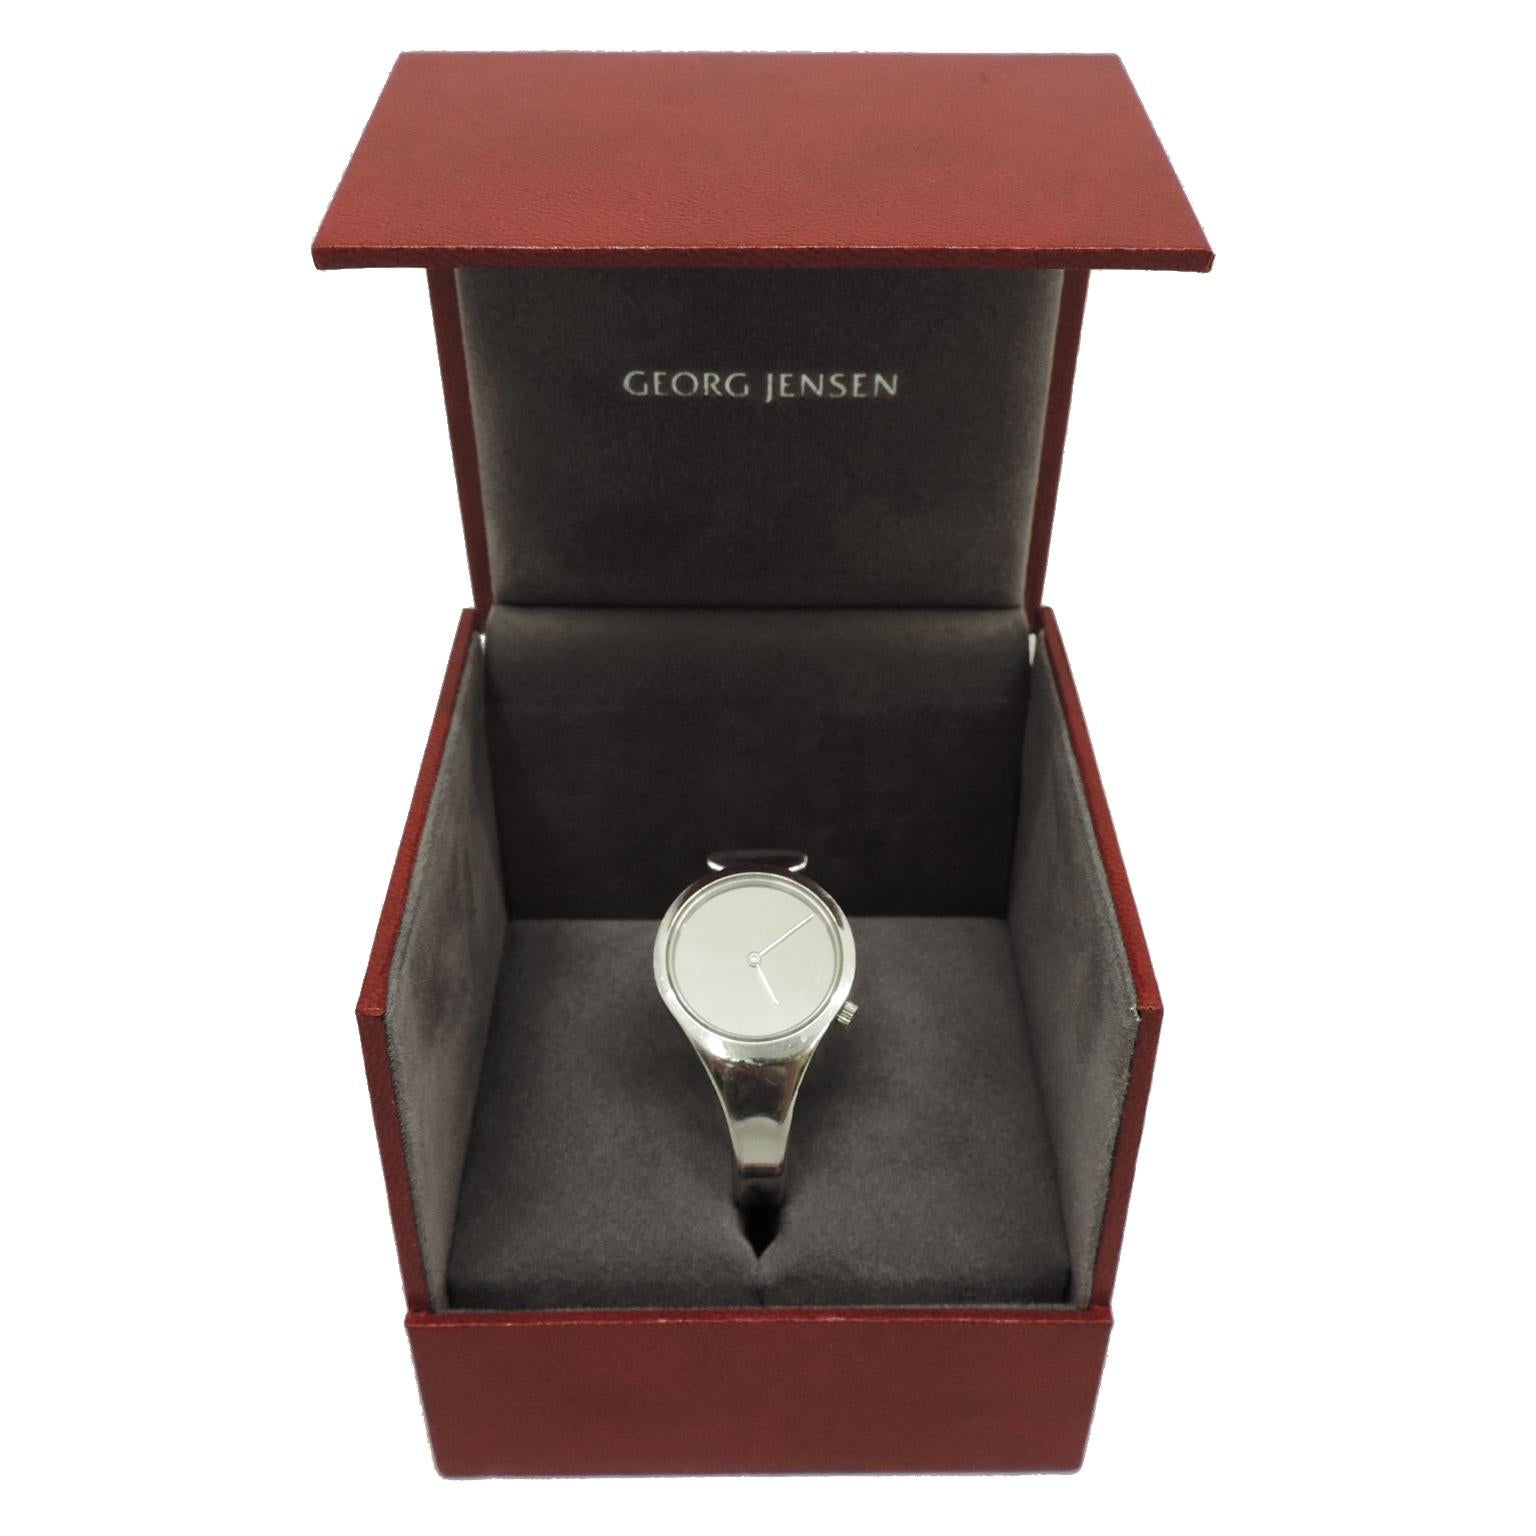 For lovers of good design this wristwatch designed by Vivianna Torun is a timeless classic. Originally designed in 1969. Numberless, strapless, mirrored, its complete lack of distracting adornments is a departure from usual watch designs. 

The